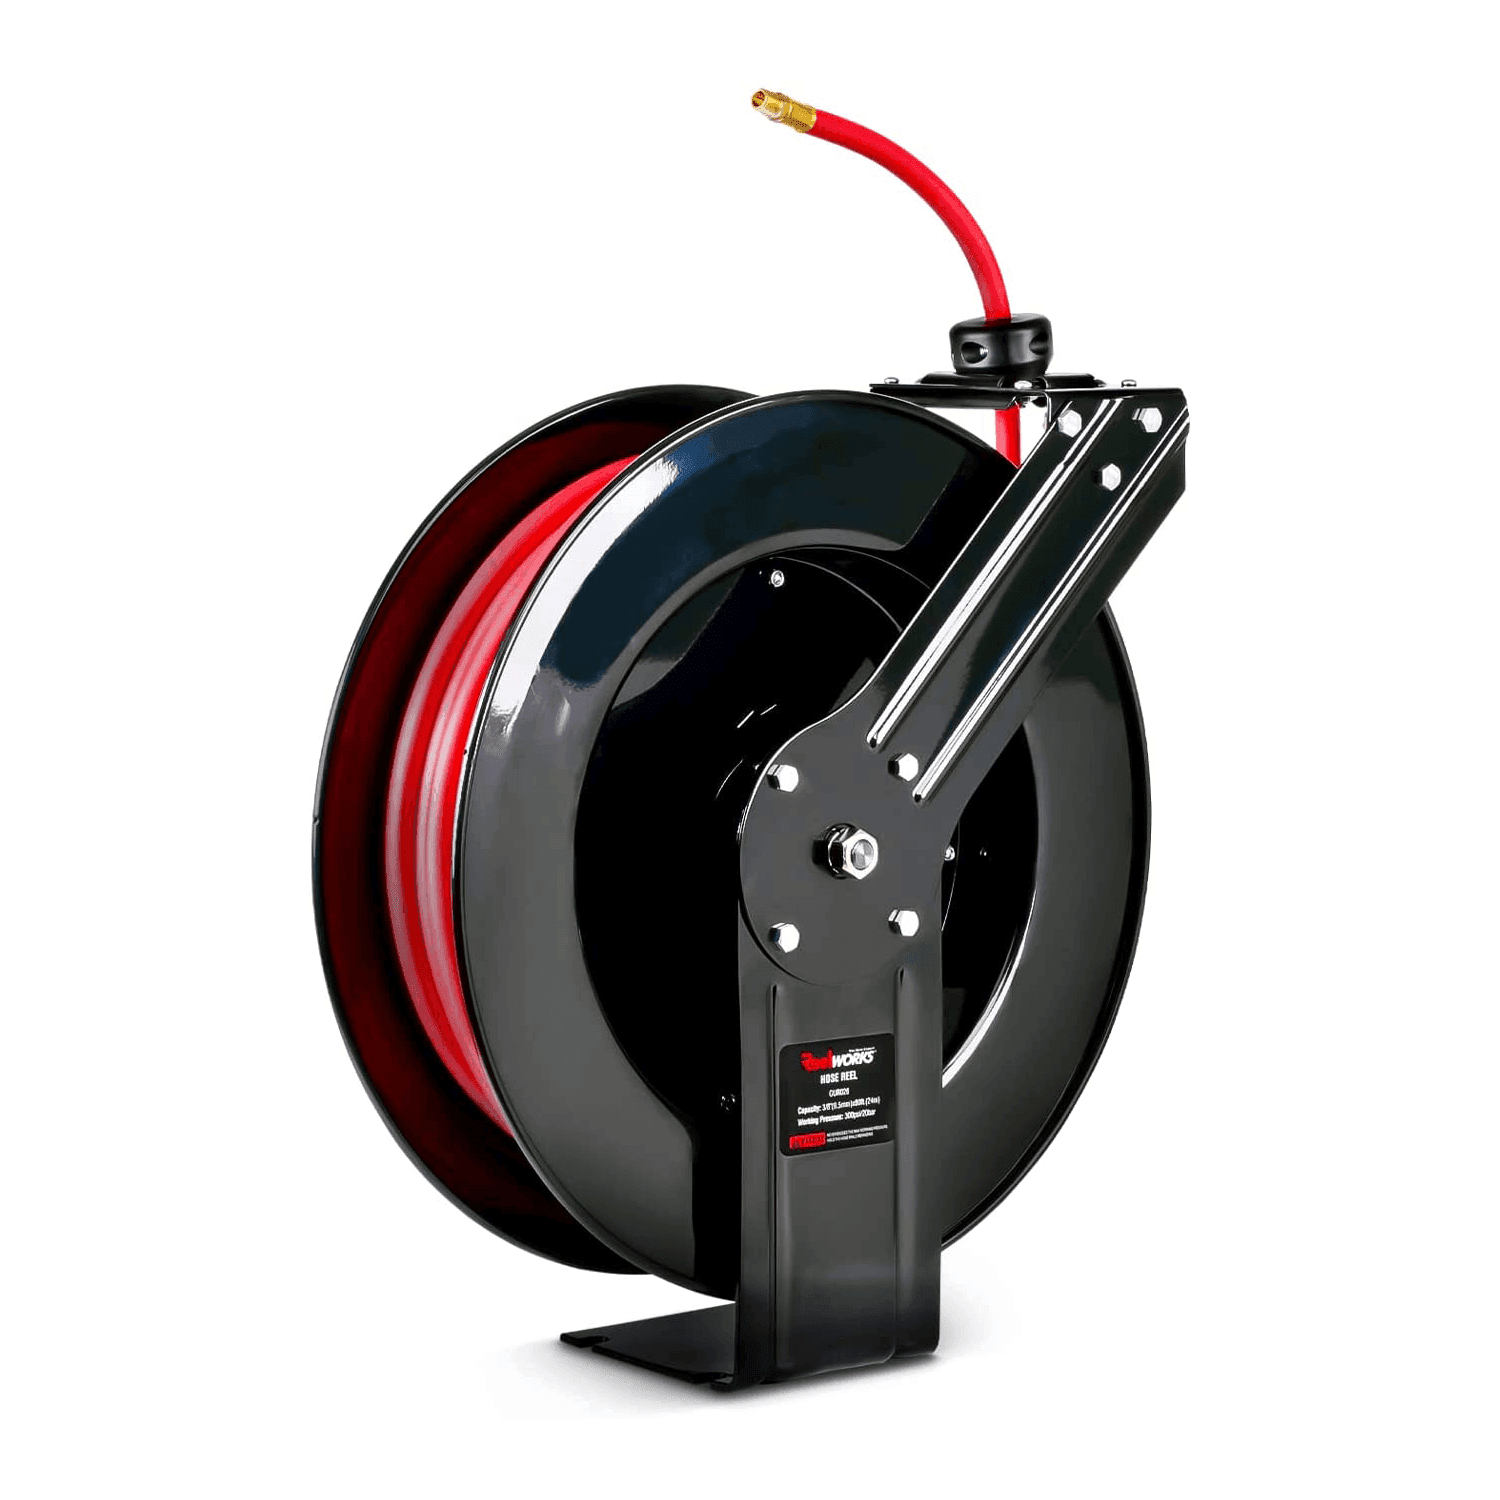 ReelWorks Industrial Retractable Air Hose Reel - 3/8" x 80' Ft, 300 PSI Max, 1/4" MNPT Connections, Single Arm Air Hose Reel